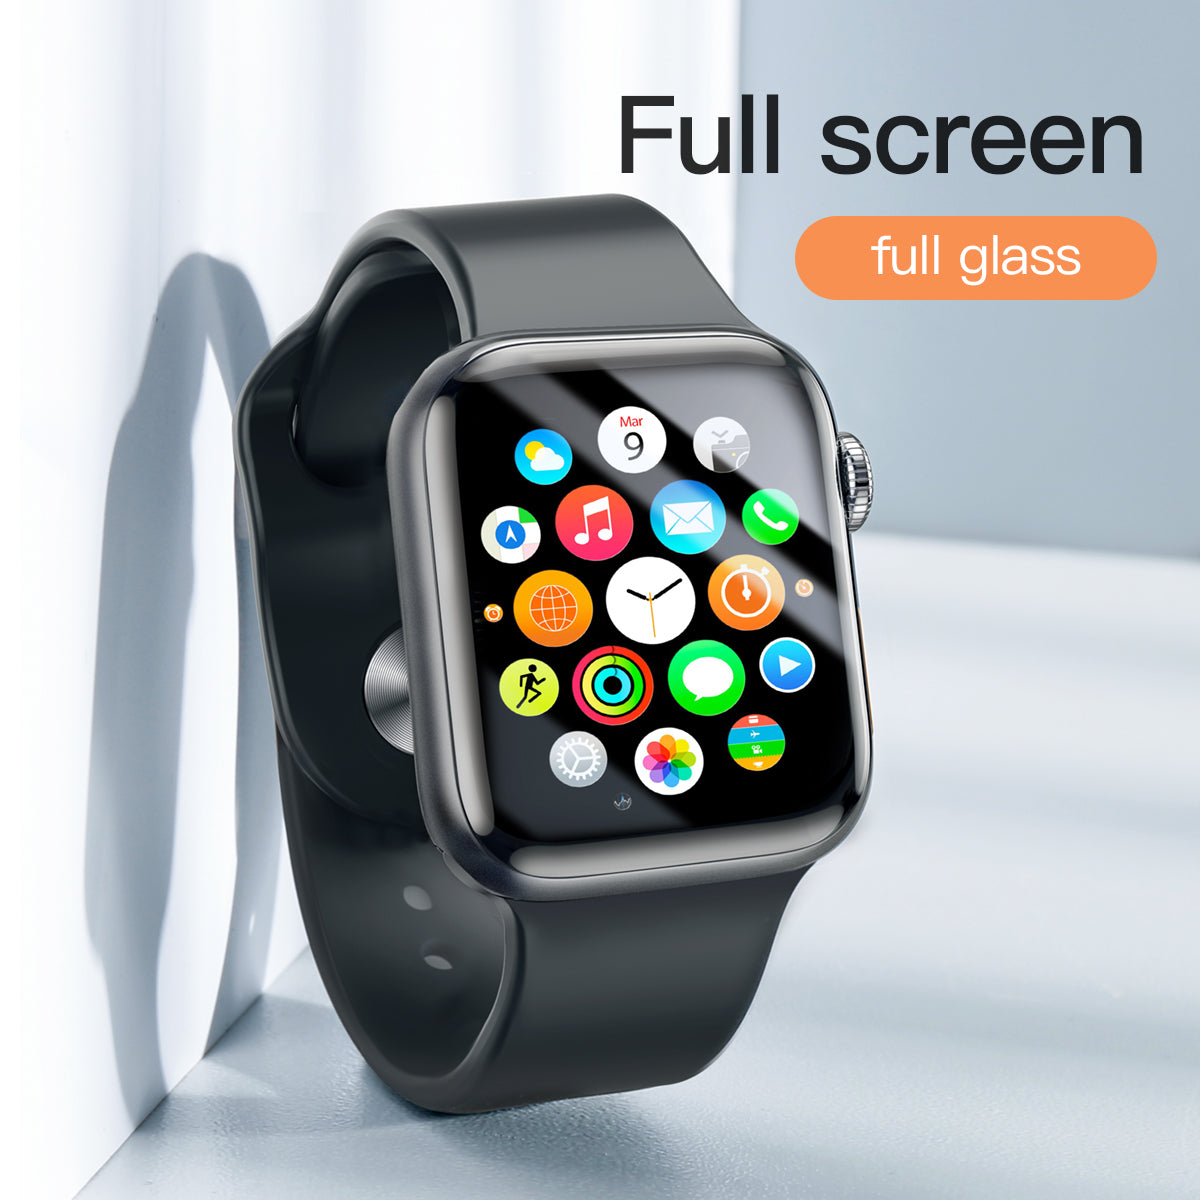 BASEUS 0.23mm 9H Full Size Curved Tempered Glass Screen Protector for Apple Watch Series 3 / 2 / 1 42mm- Black